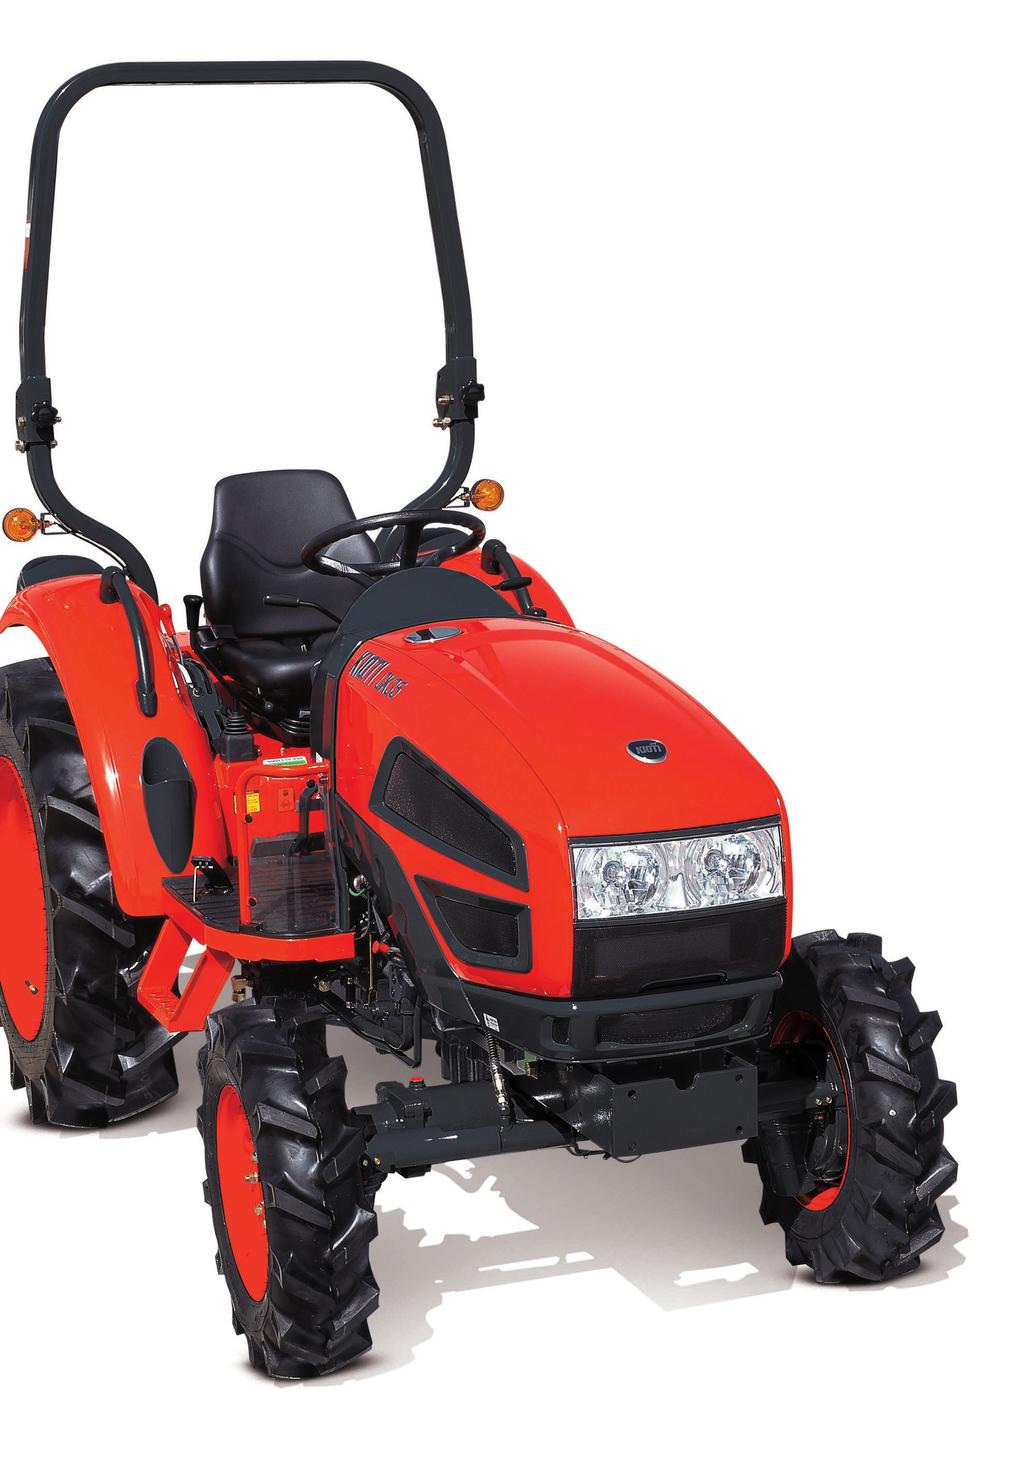 KIOTI Compact Tractor Distinctive design The curved hood and fender add distinctive lines to the CK Series tractors.